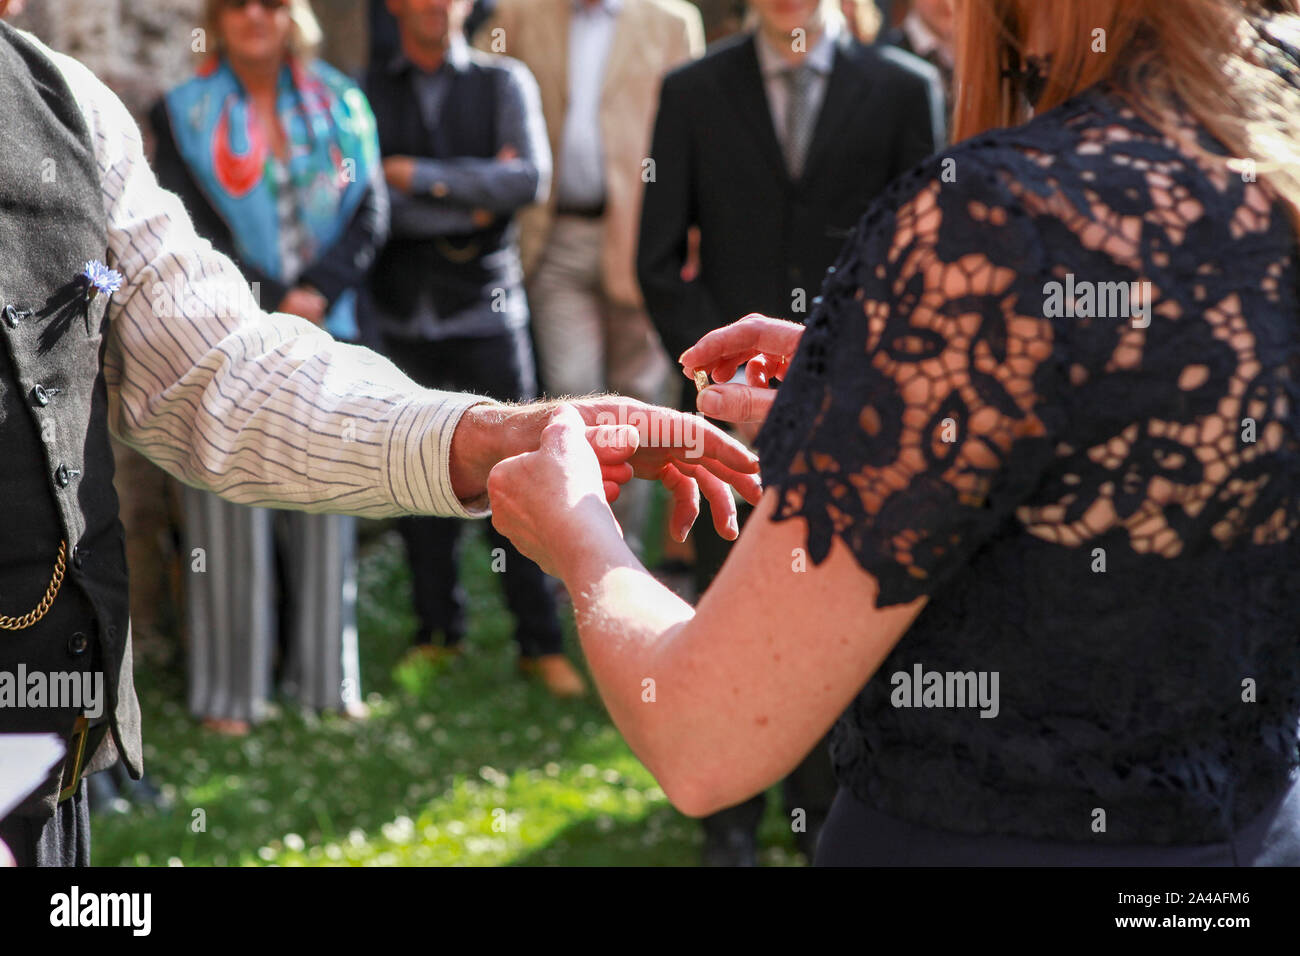 This image relates to an Handfasting Ceremony in Shropshire. Handfasting, according to the groom, dates back to the 11th century. Stock Photo